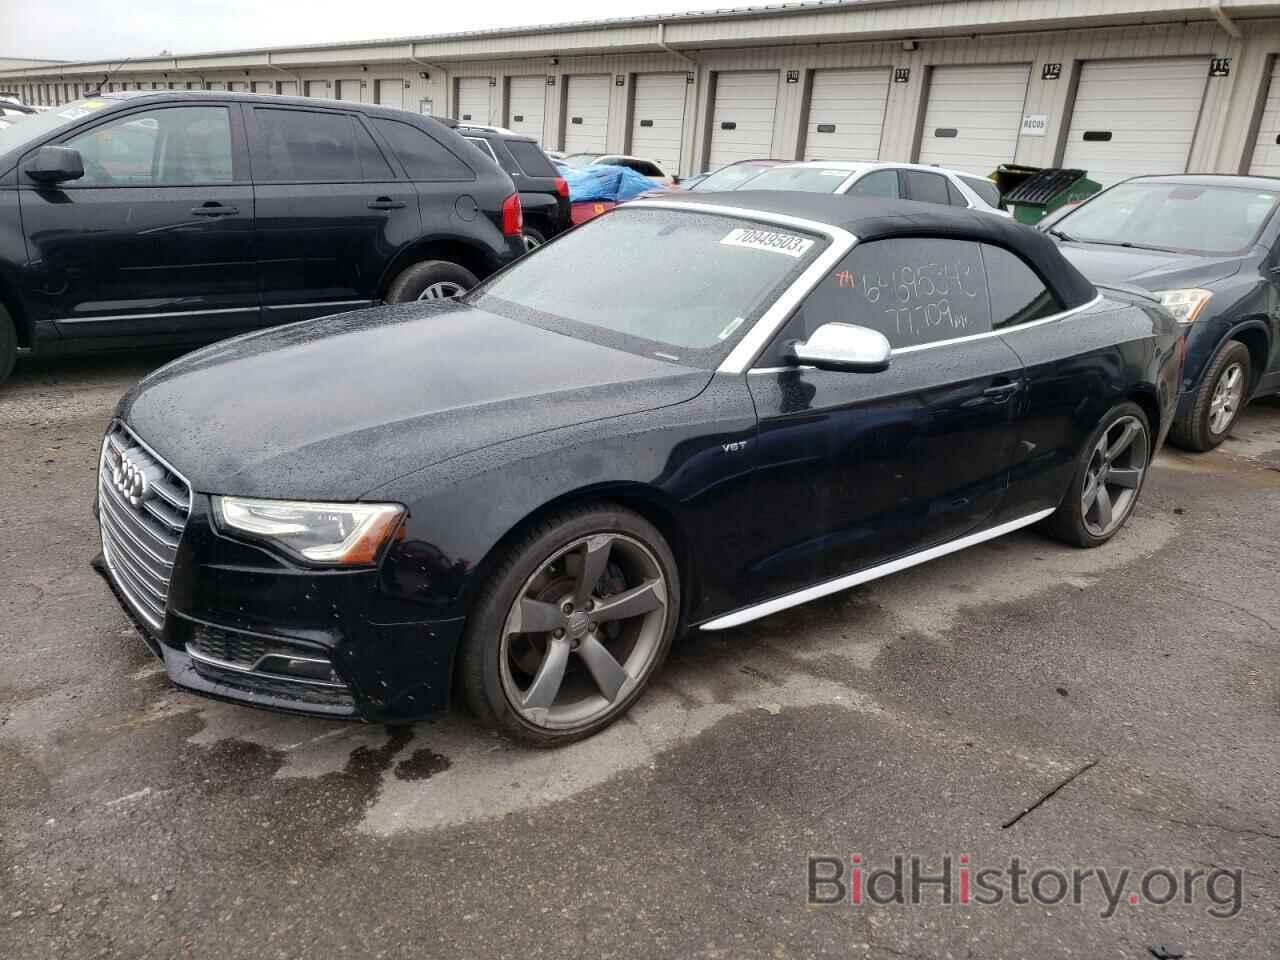 Photo WAUVGAFH8FN005430 - AUDI S5/RS5 2015